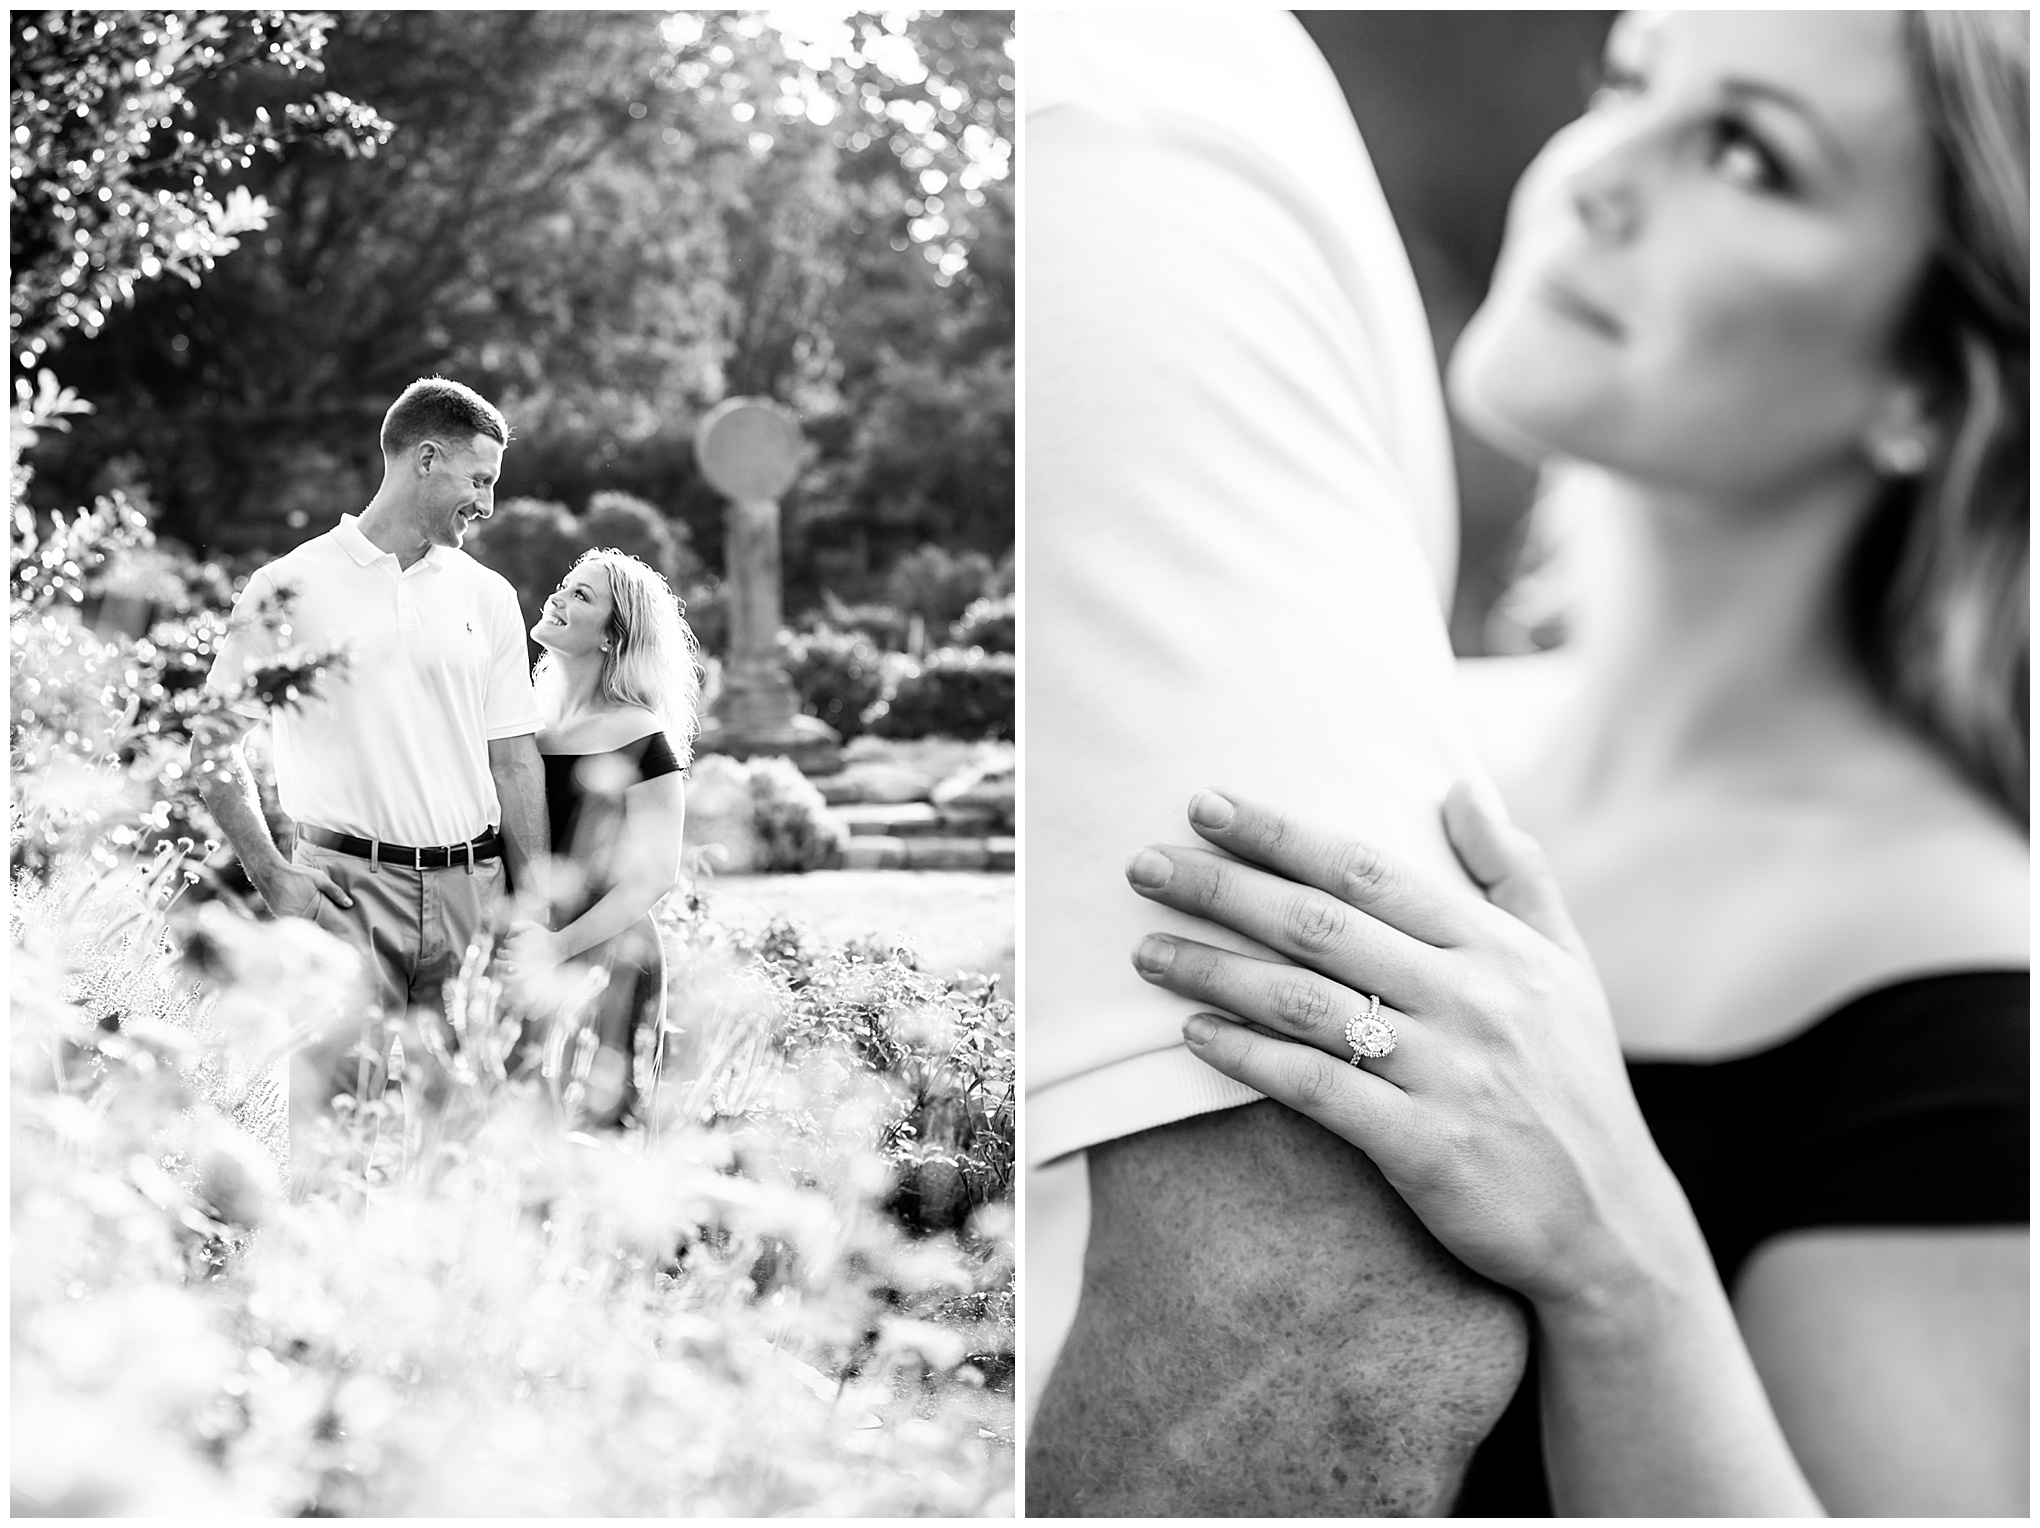 National Cathedral engagement photos, National Cathedral, D.C. engagement photos, classic engagement portraits, Washington National Cathedral, natural light engagement photos, D.C. engagement photographer, Rachel E.H. Photography, sunrise engagement photos, couple laughing in garden, black and white engagement photos